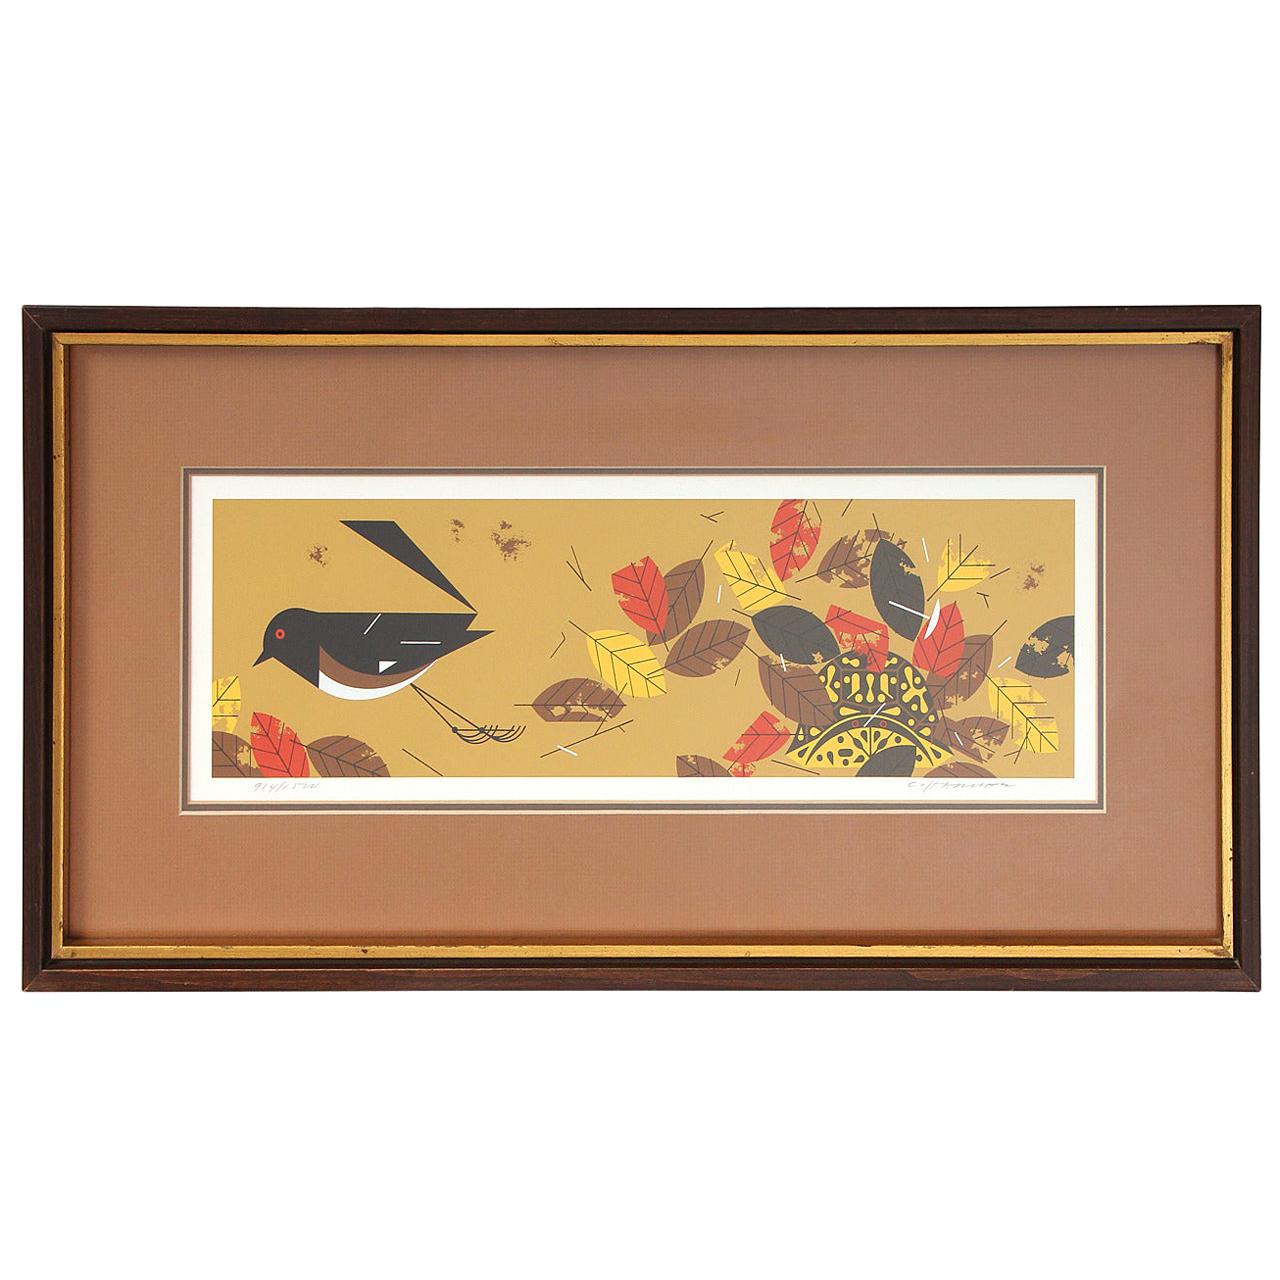 Modernist Print of Bird with Fall Leaves by Charley Harper For Sale